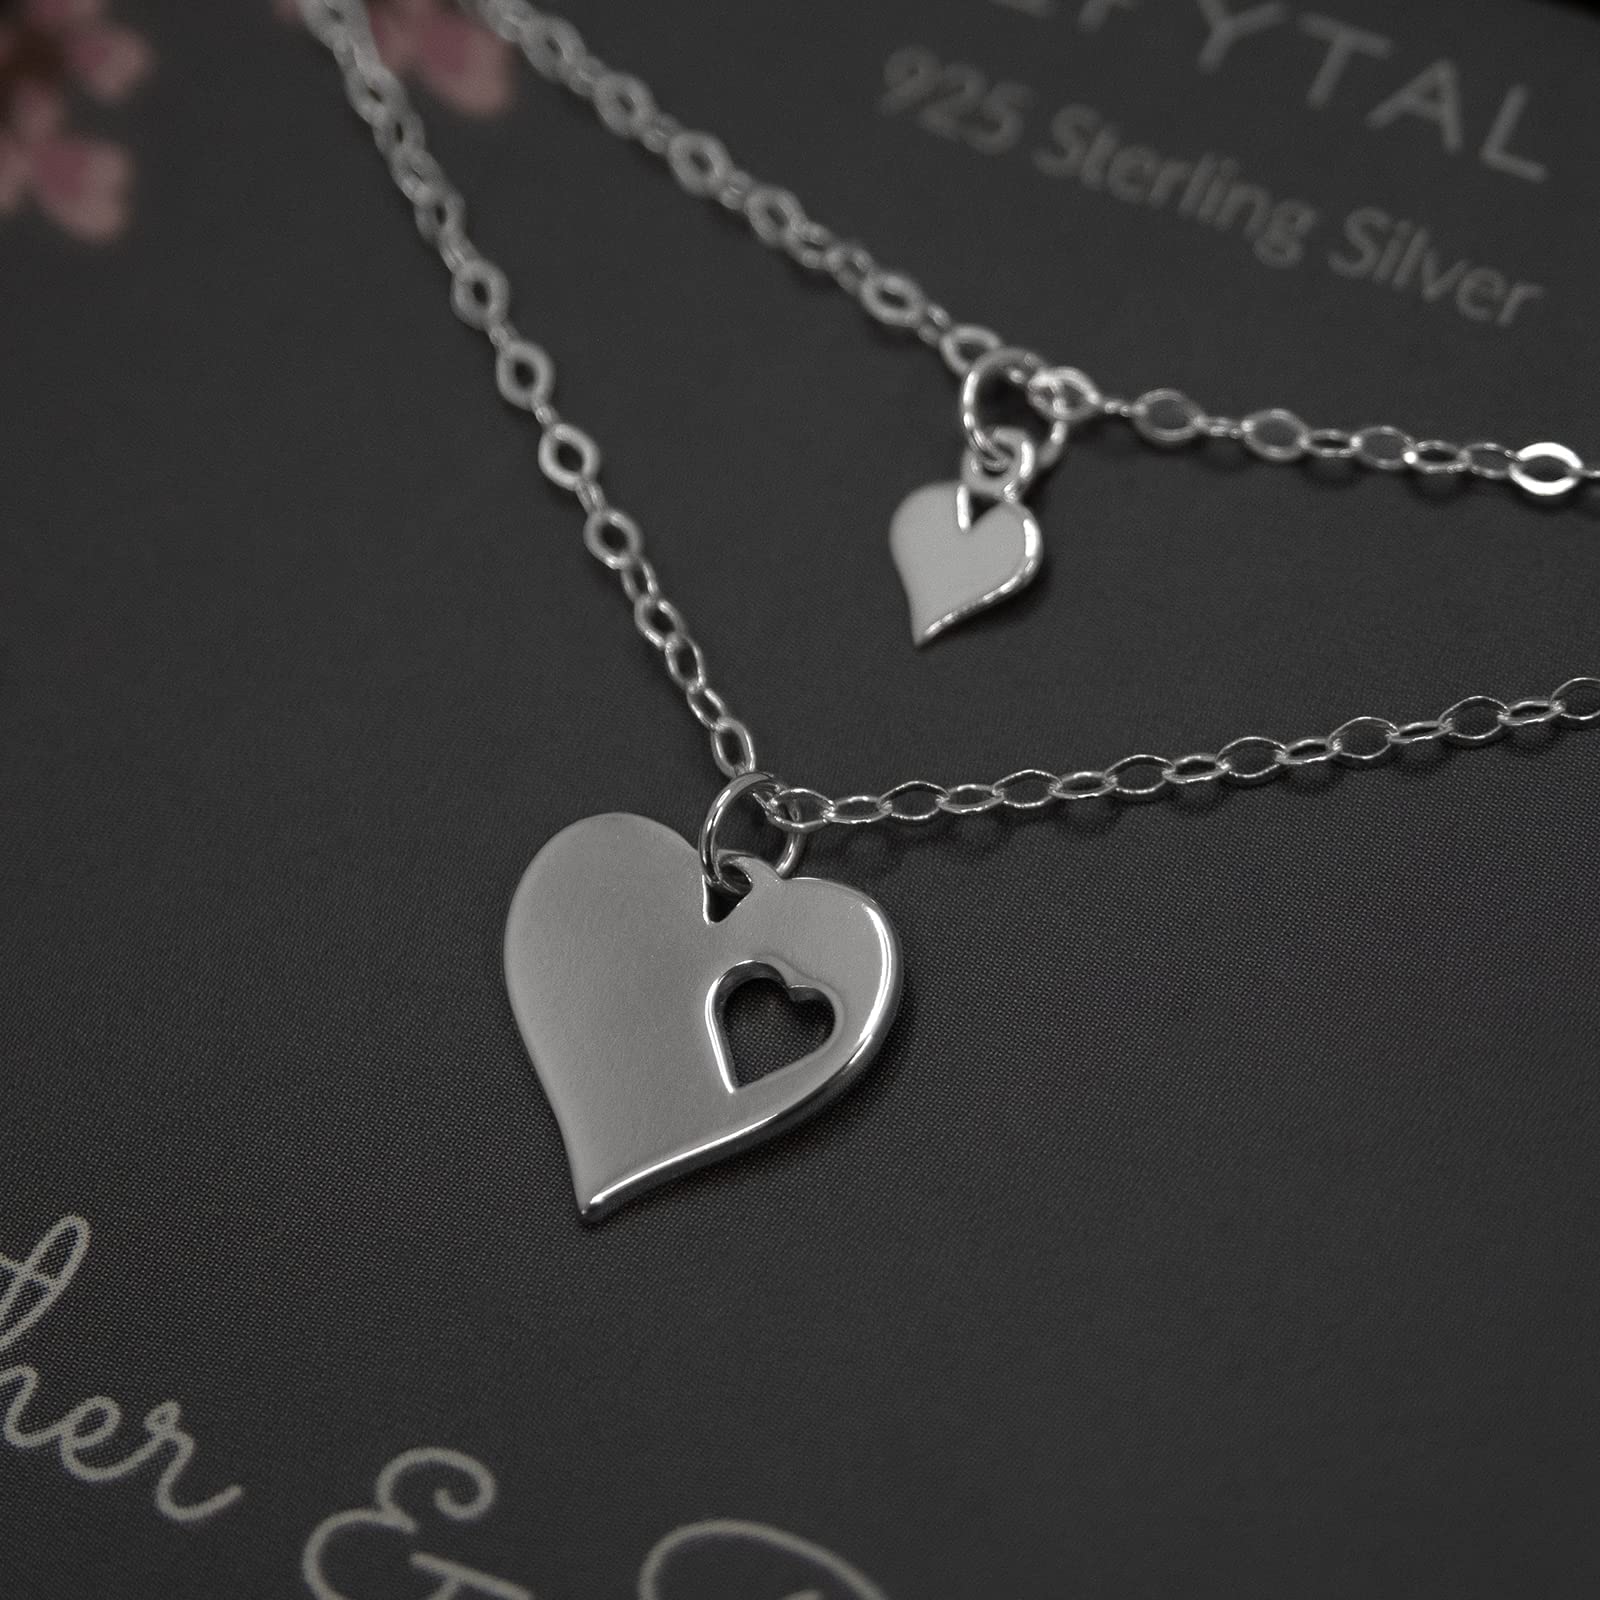 EFYTAL Mother Daughter Set For Two, Cutout Heart Necklaces, 2 Sterling Silver Necklaces Mother's Day Gift